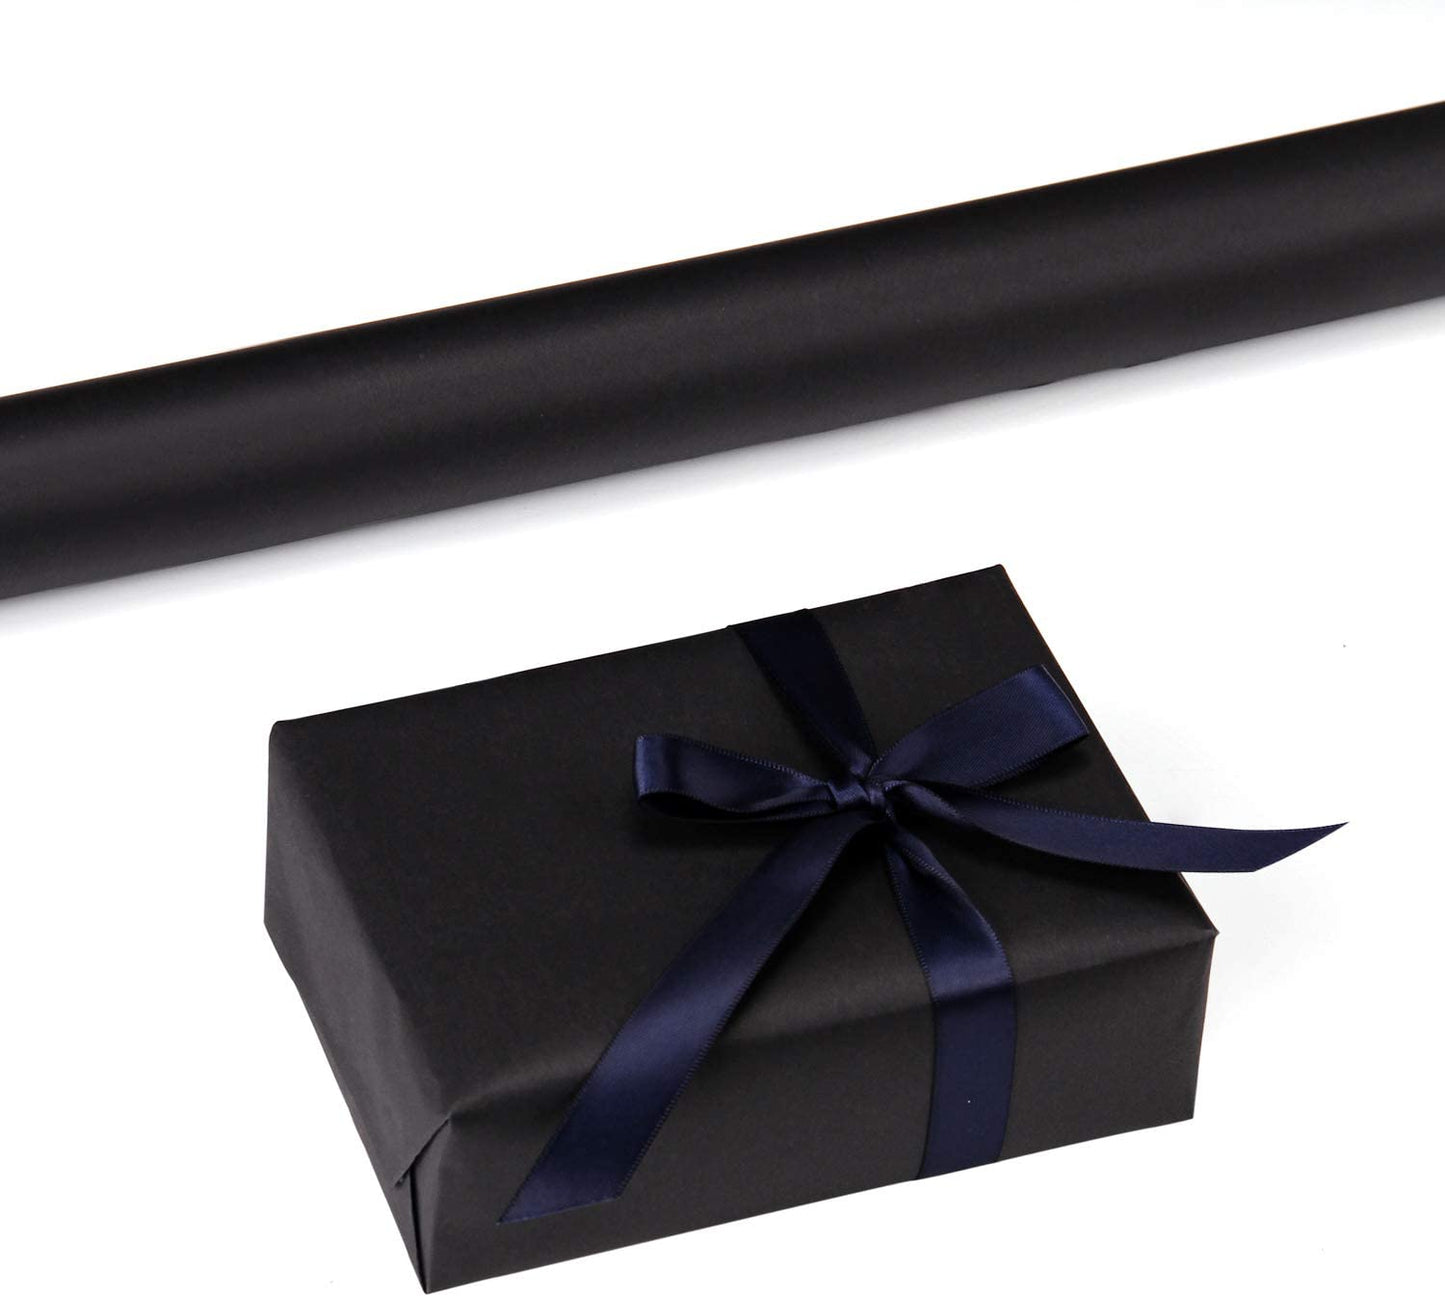 WRAPLA Black Kraft Paper Roll - 76CM x 30M - Natural Recyclable Paper Crafts, Art, Small Wrapping, Packing, Postal, Shipping, Dunnage & Parcel